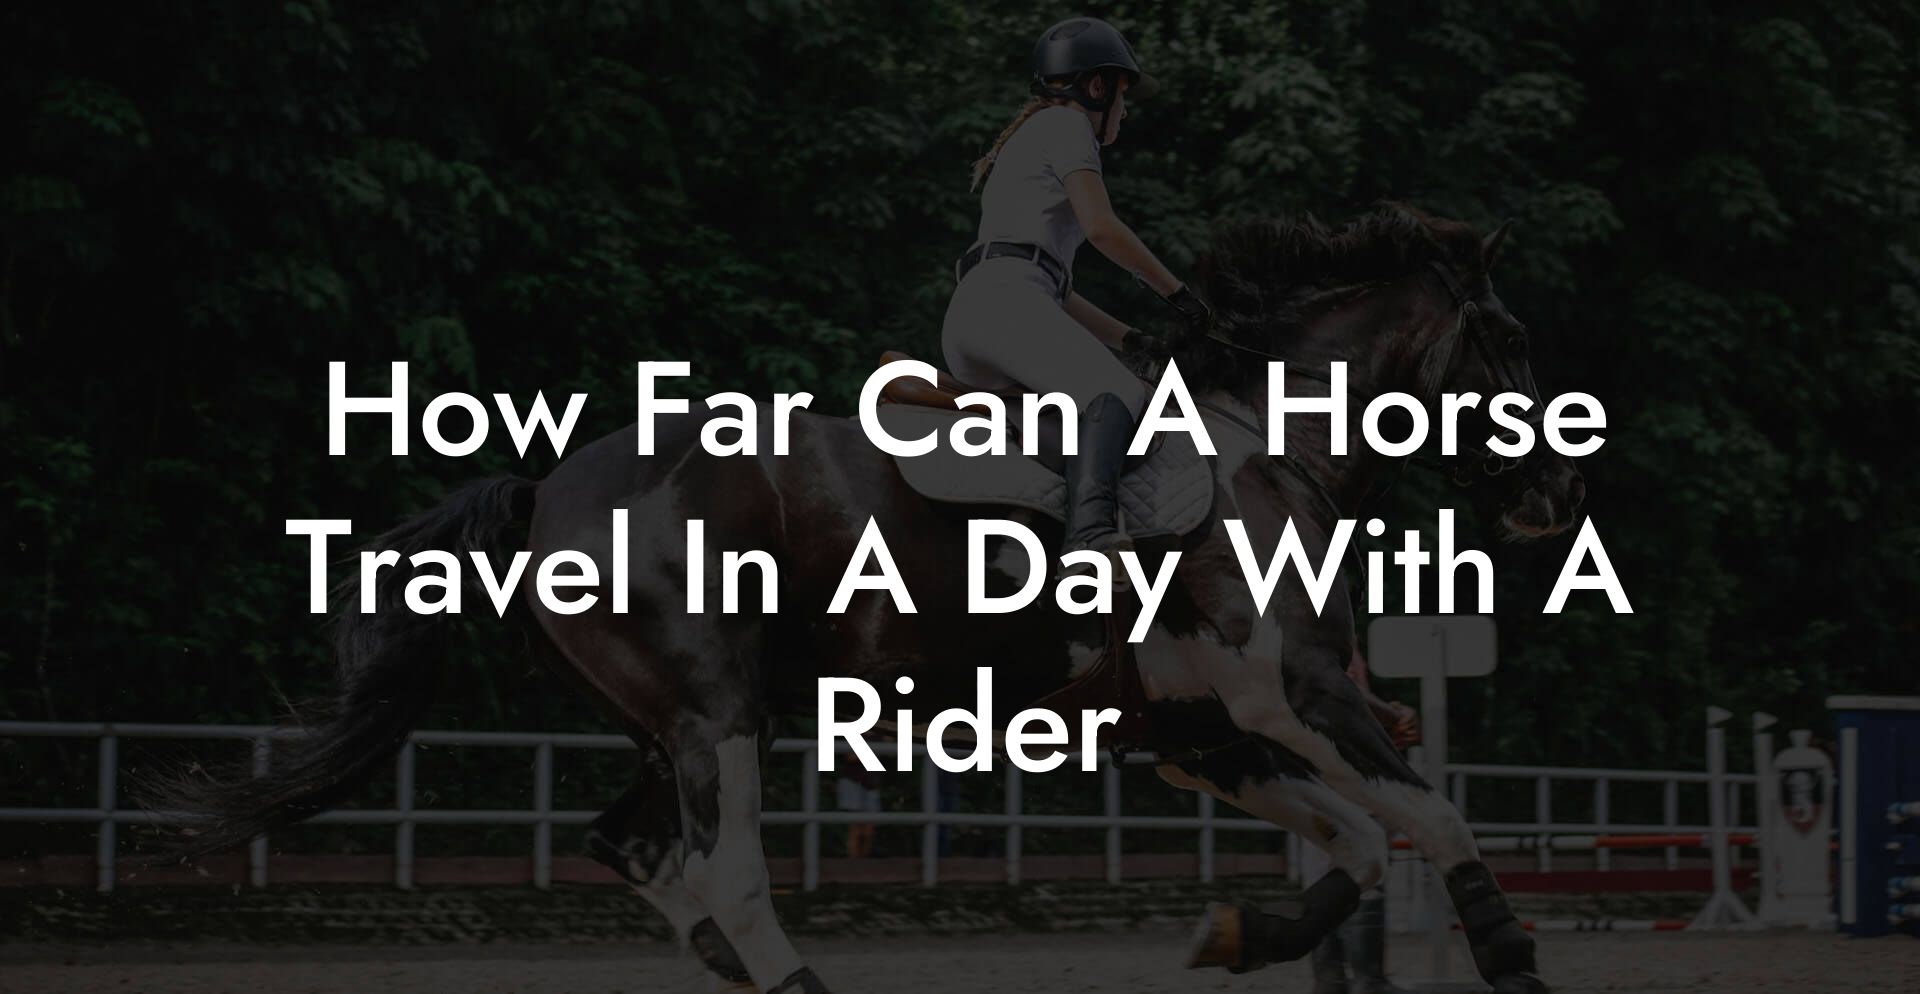 How Far Can A Horse Travel In A Day With A Rider